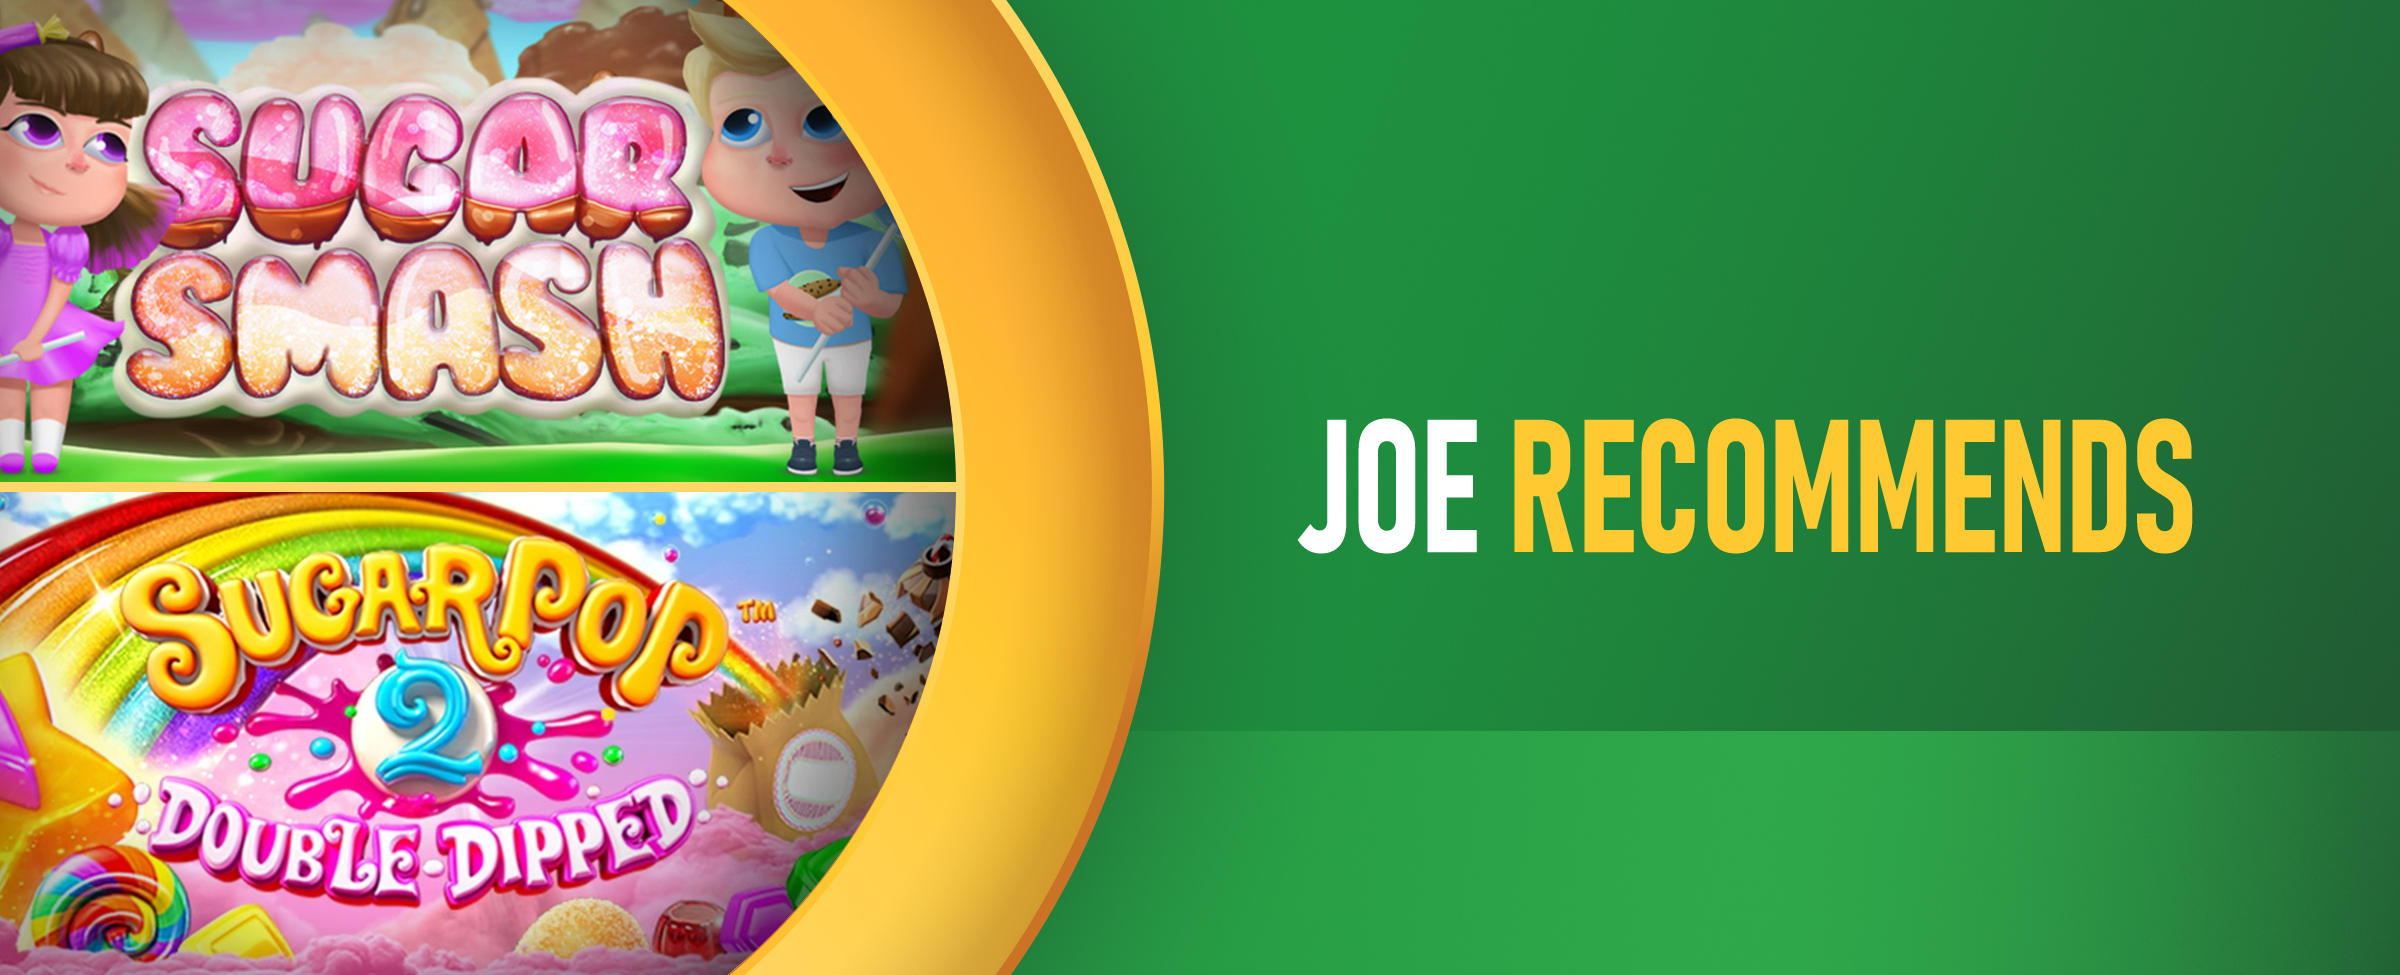 The Sugar Smash logo and Sugar Pop 2: Double Dipped logo with the title ‘Joe Recommends’ on a green background